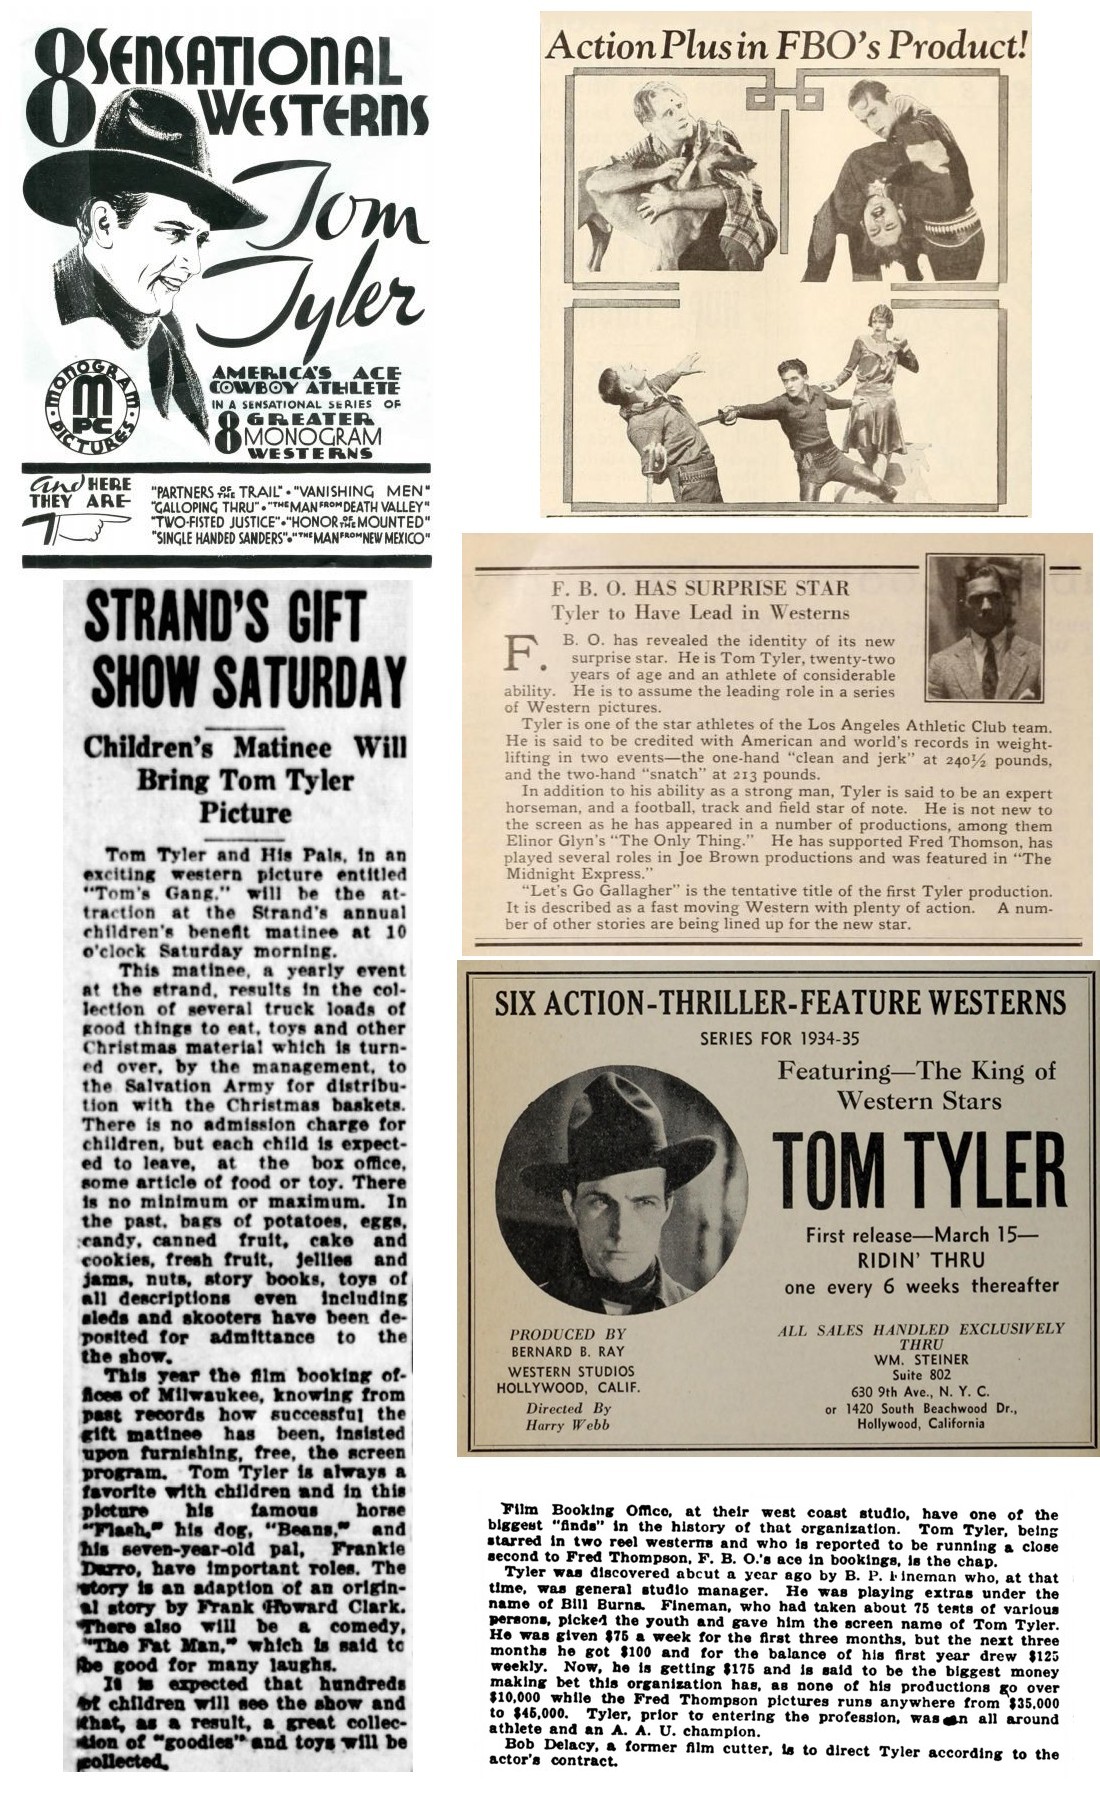 Tom Tyler 8 sensational westerns, Action plus in FBO's product, FBO has surprise star, Strand's gift show Saturday